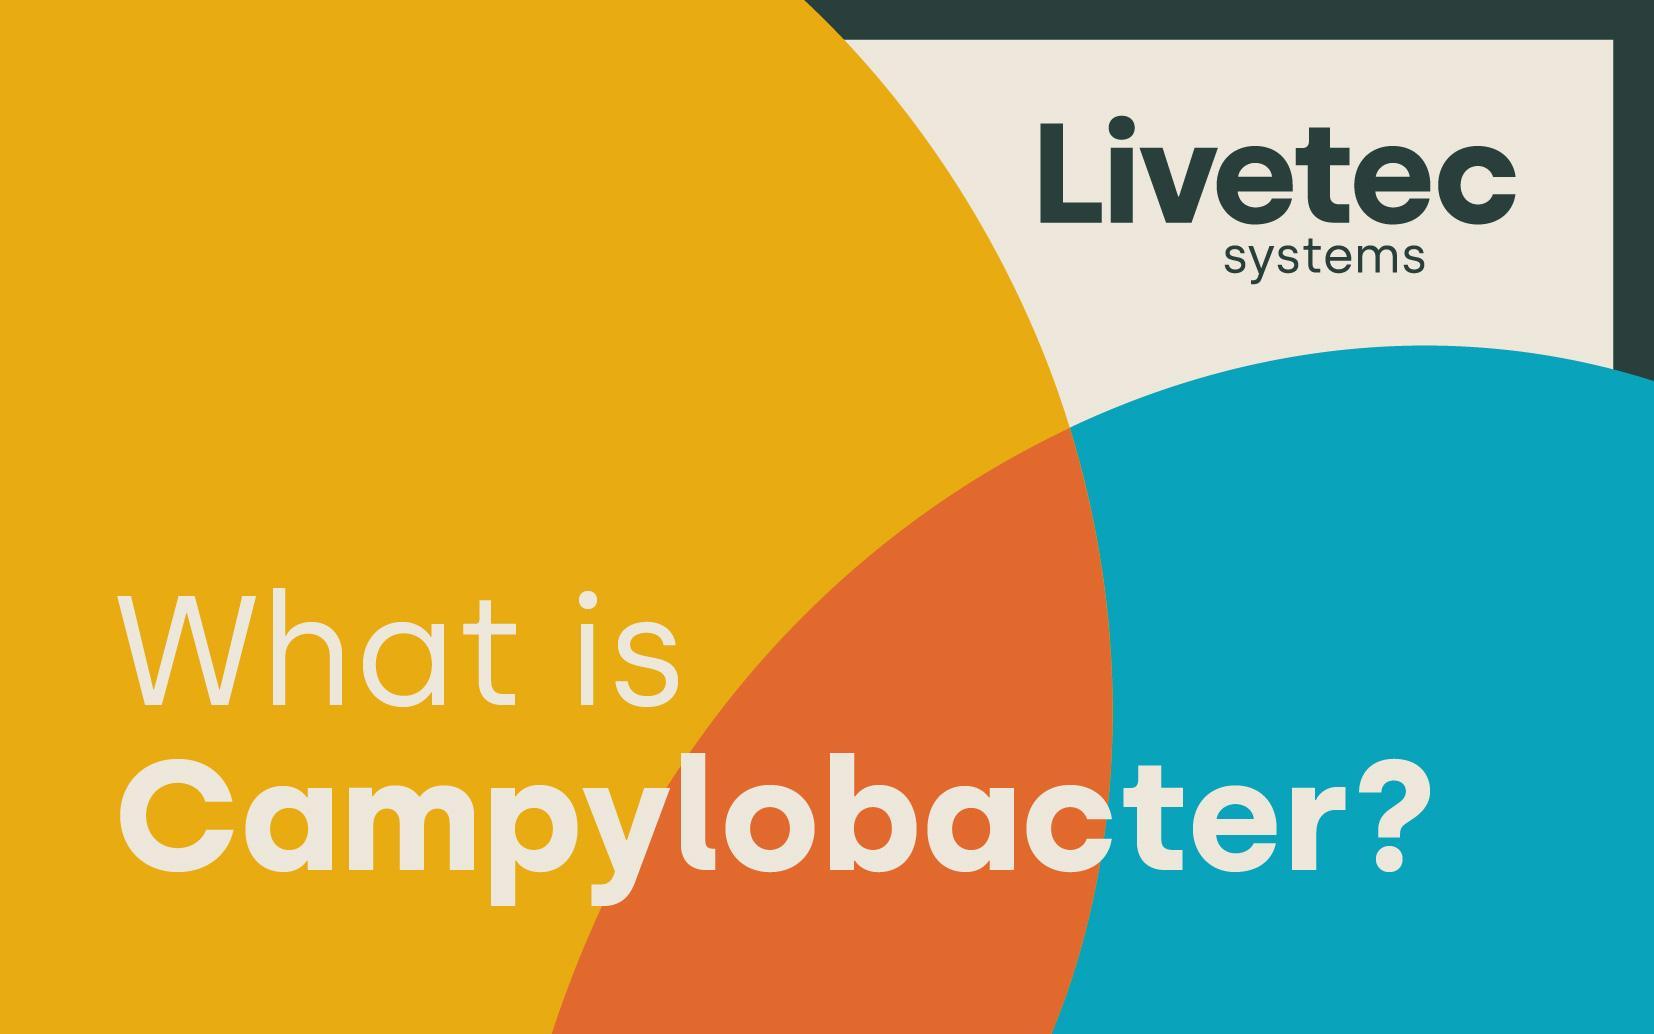 What is Campylobacter?